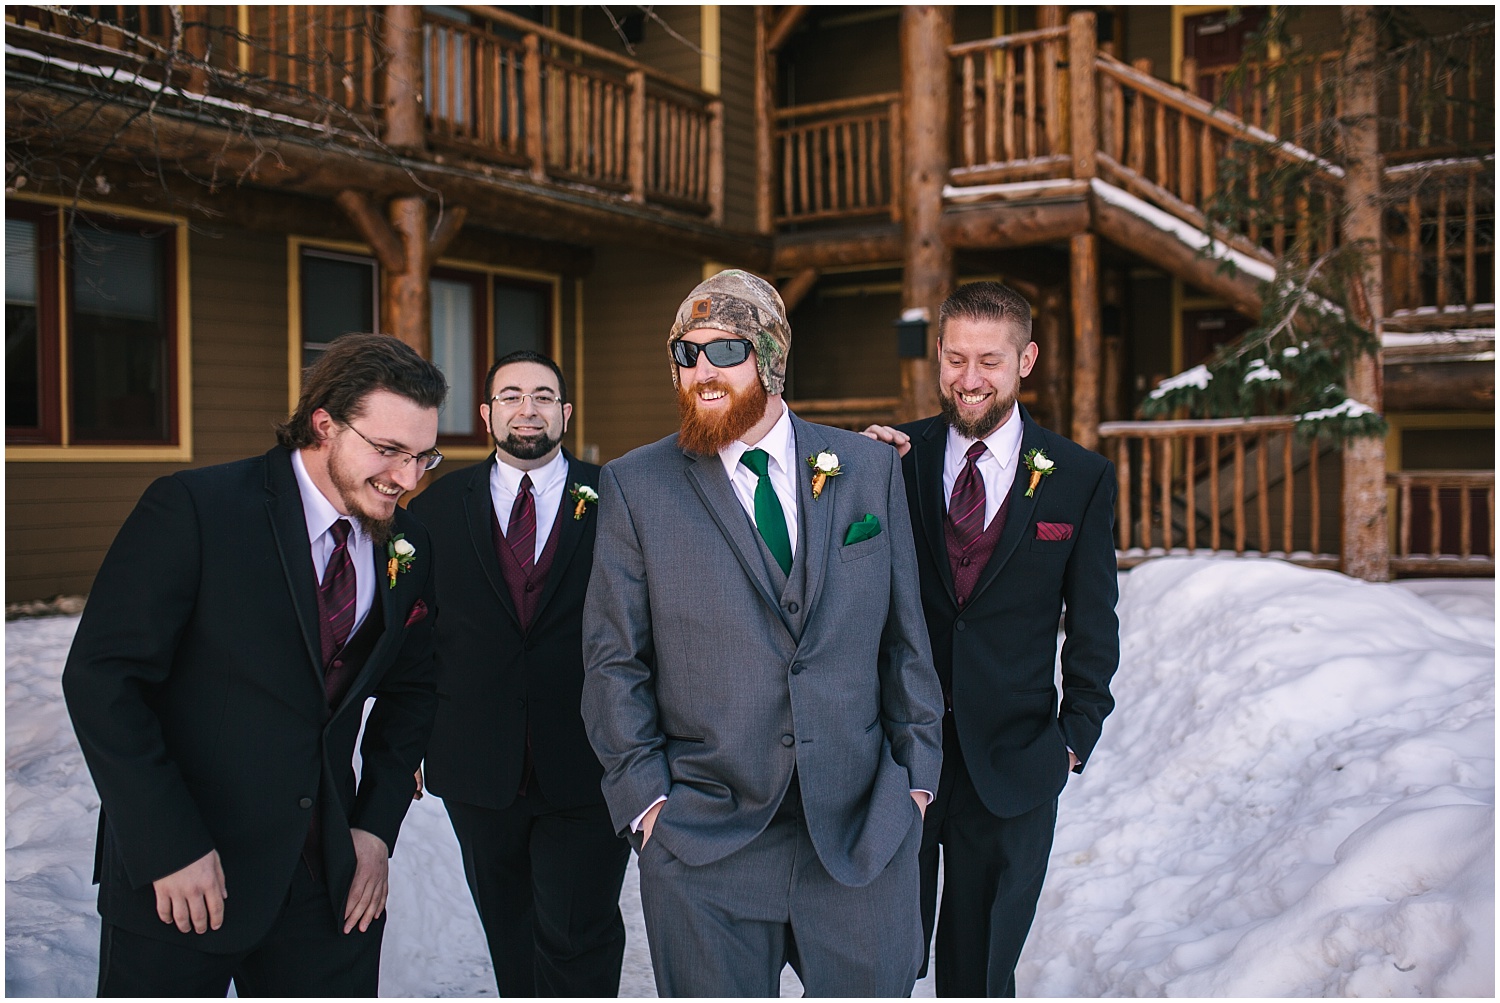 wedding party pictures at The Lodge at Breckenridge winter wedding